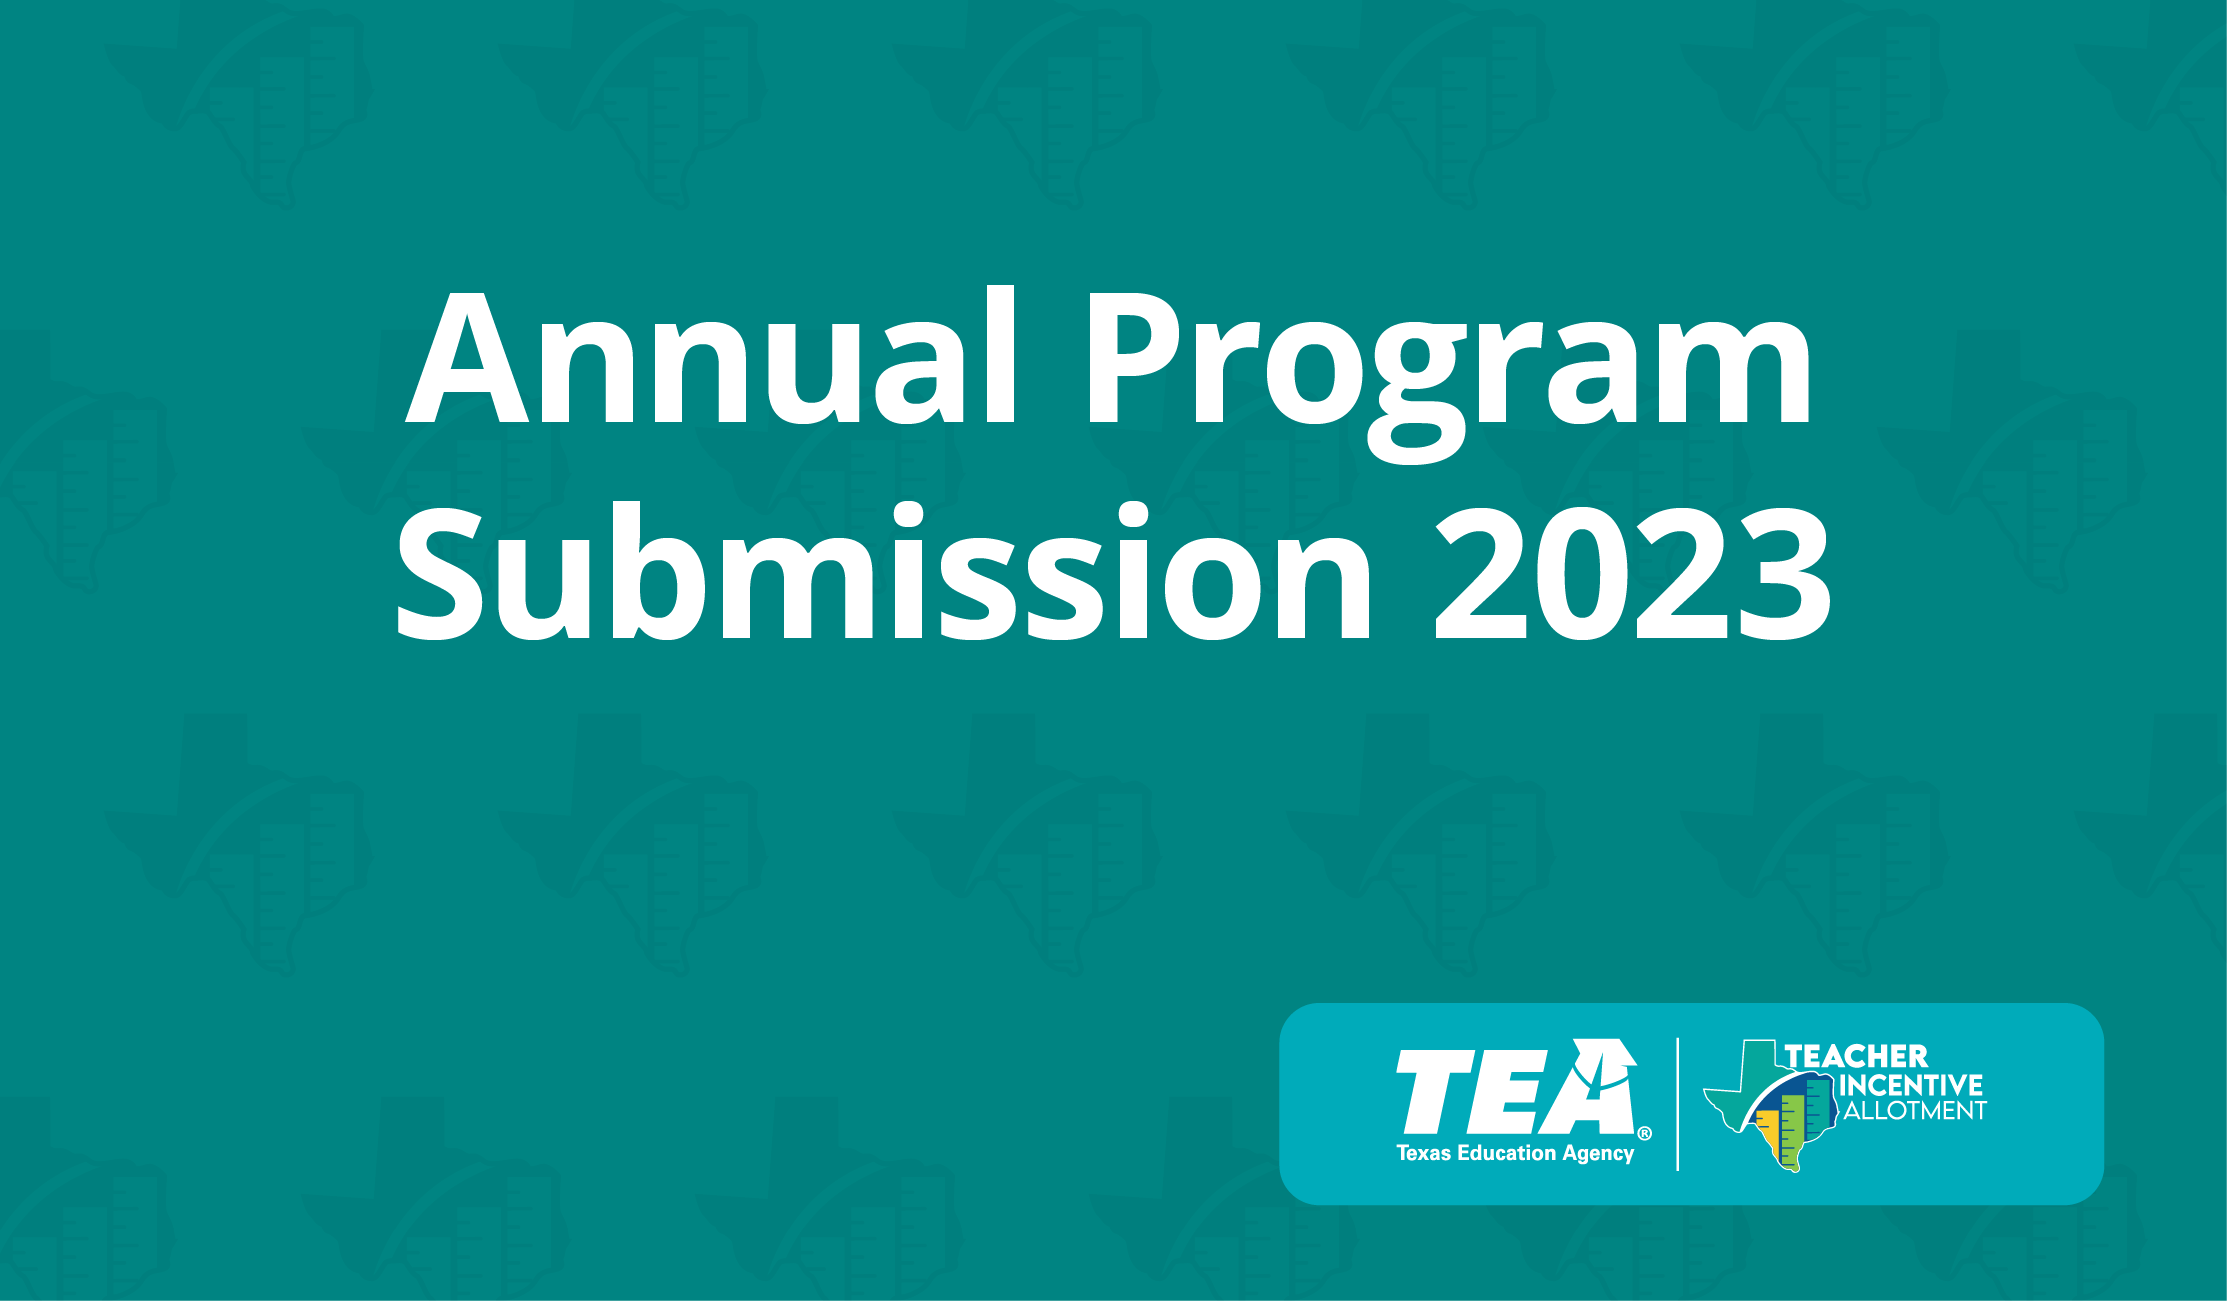 Annual Program Submission 2023